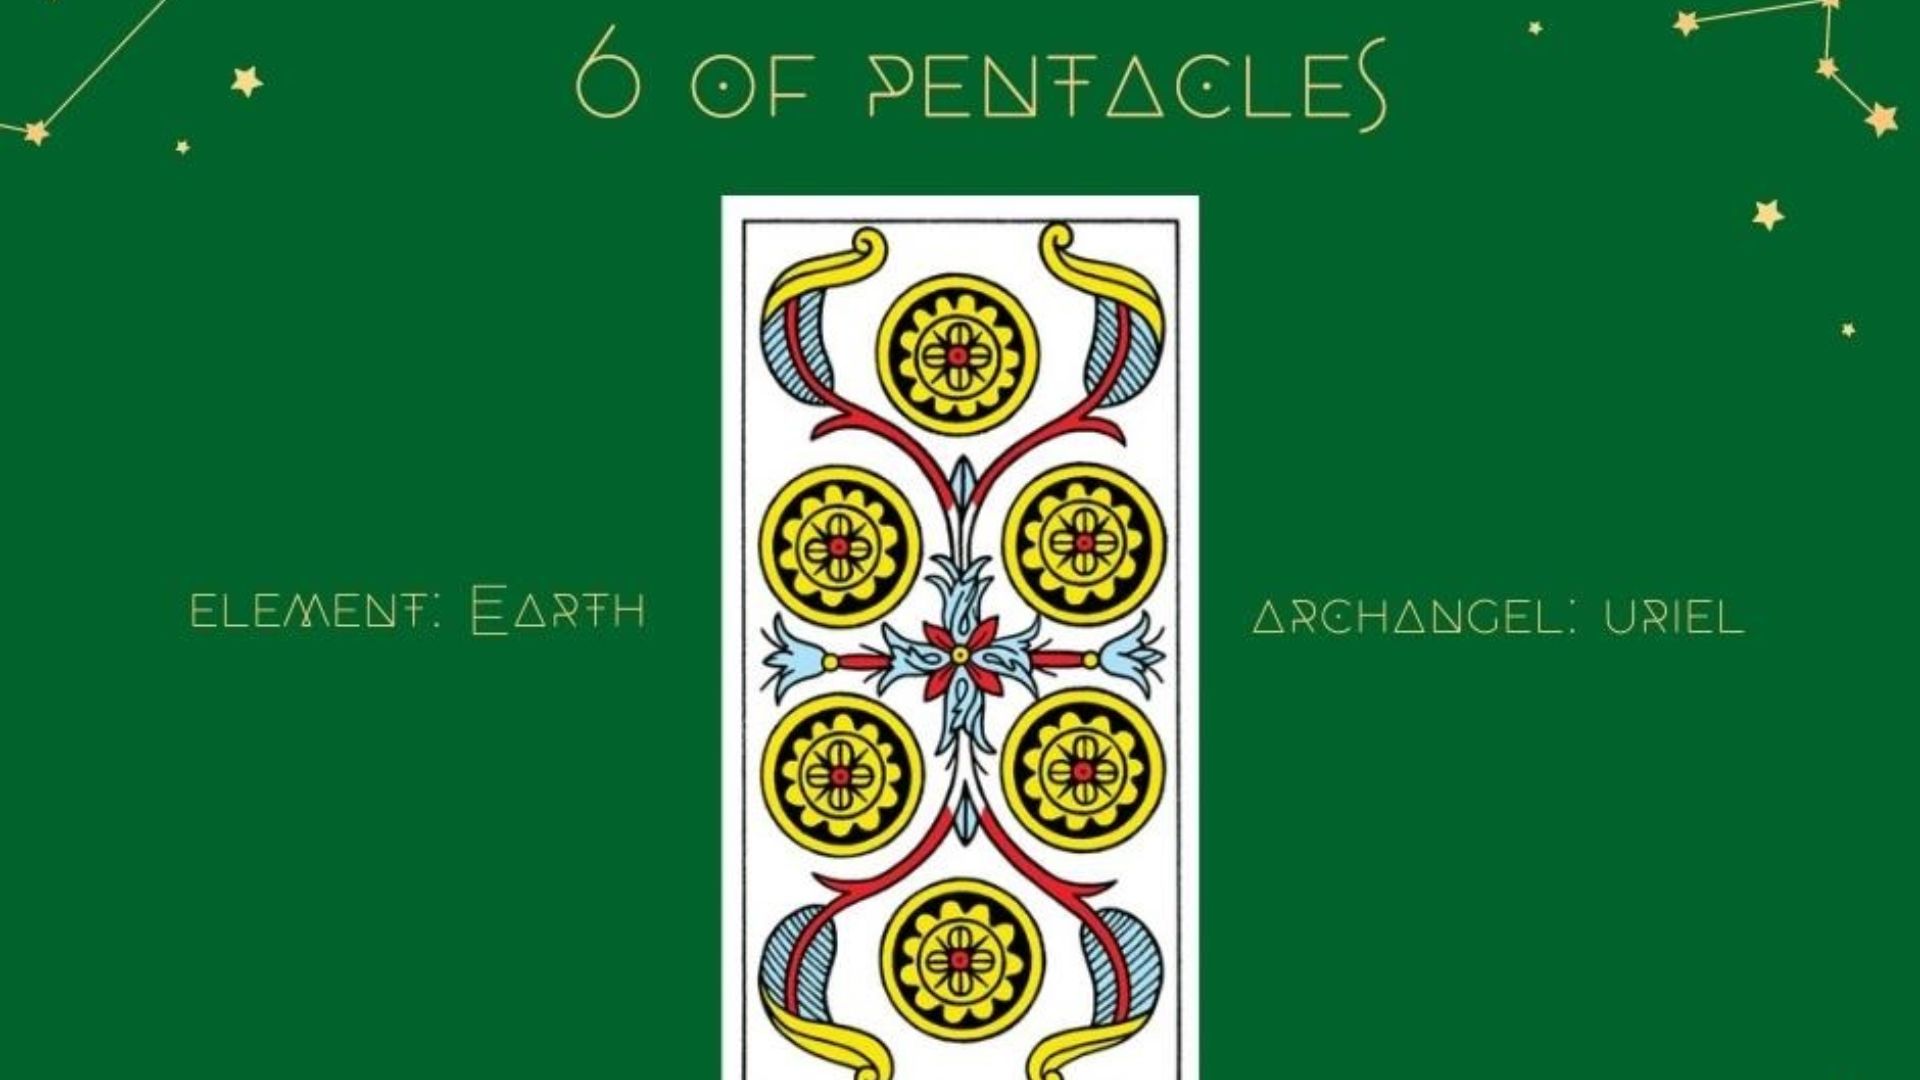 6 of Pentacles Tarot Card In Green Background